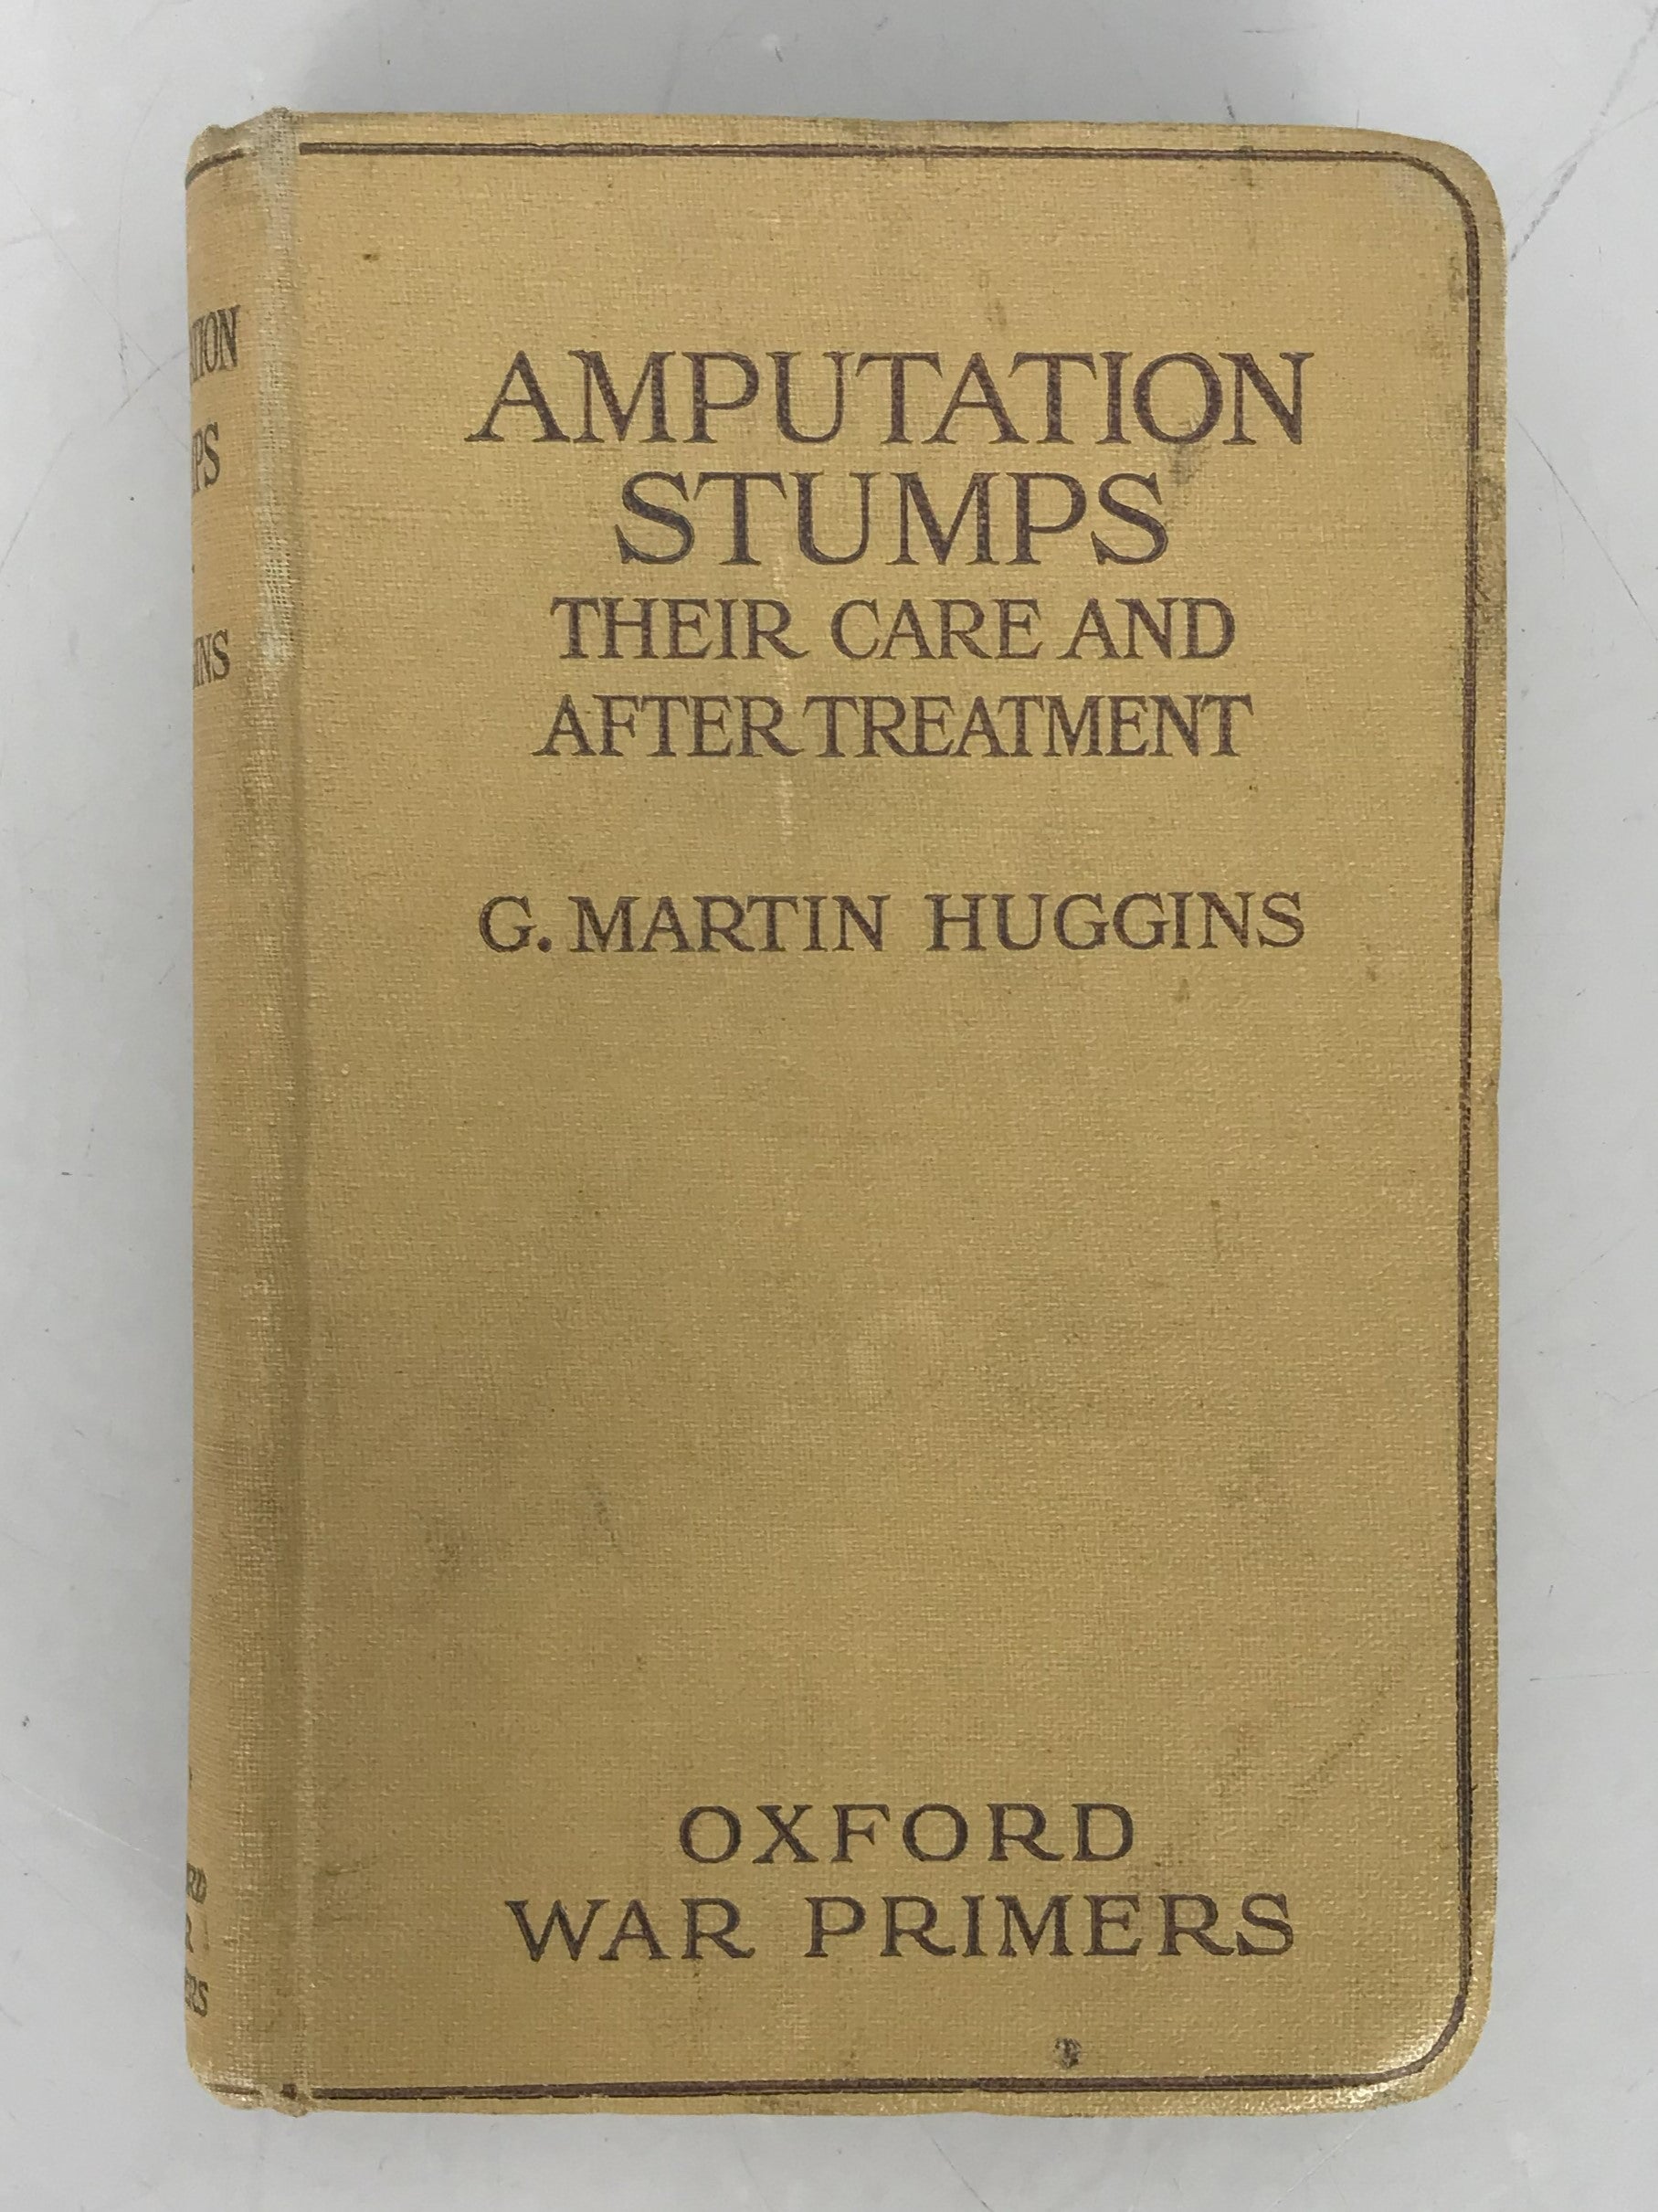 Amputation Stumps Their Care and After Treatment by G. Martin Higgins Oxford War Primers 1918